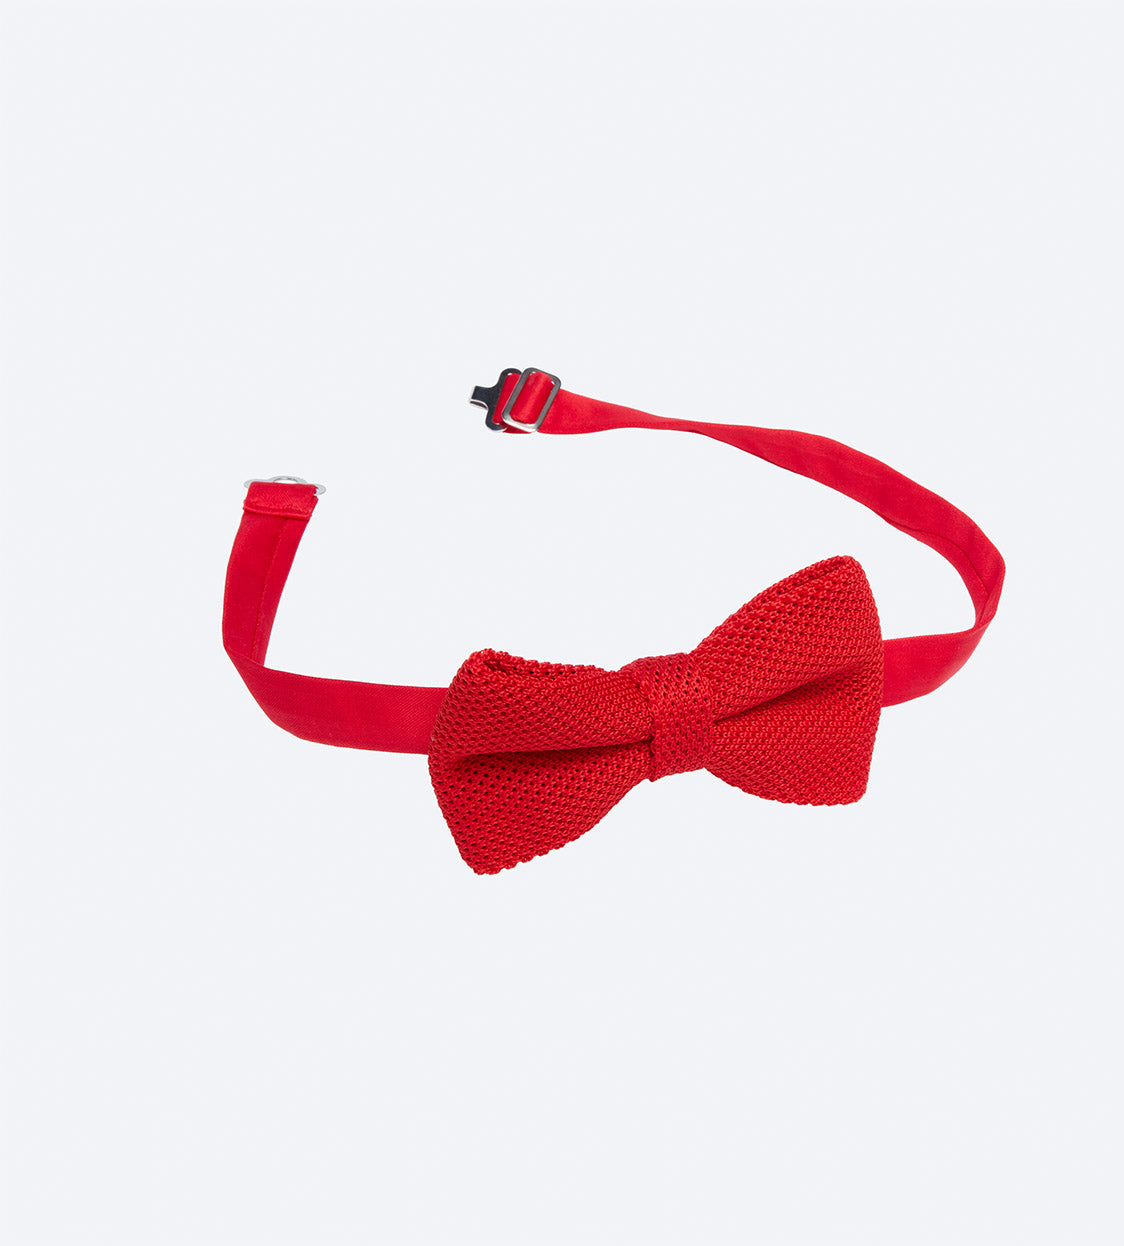 Red Pinhead Bow Tie